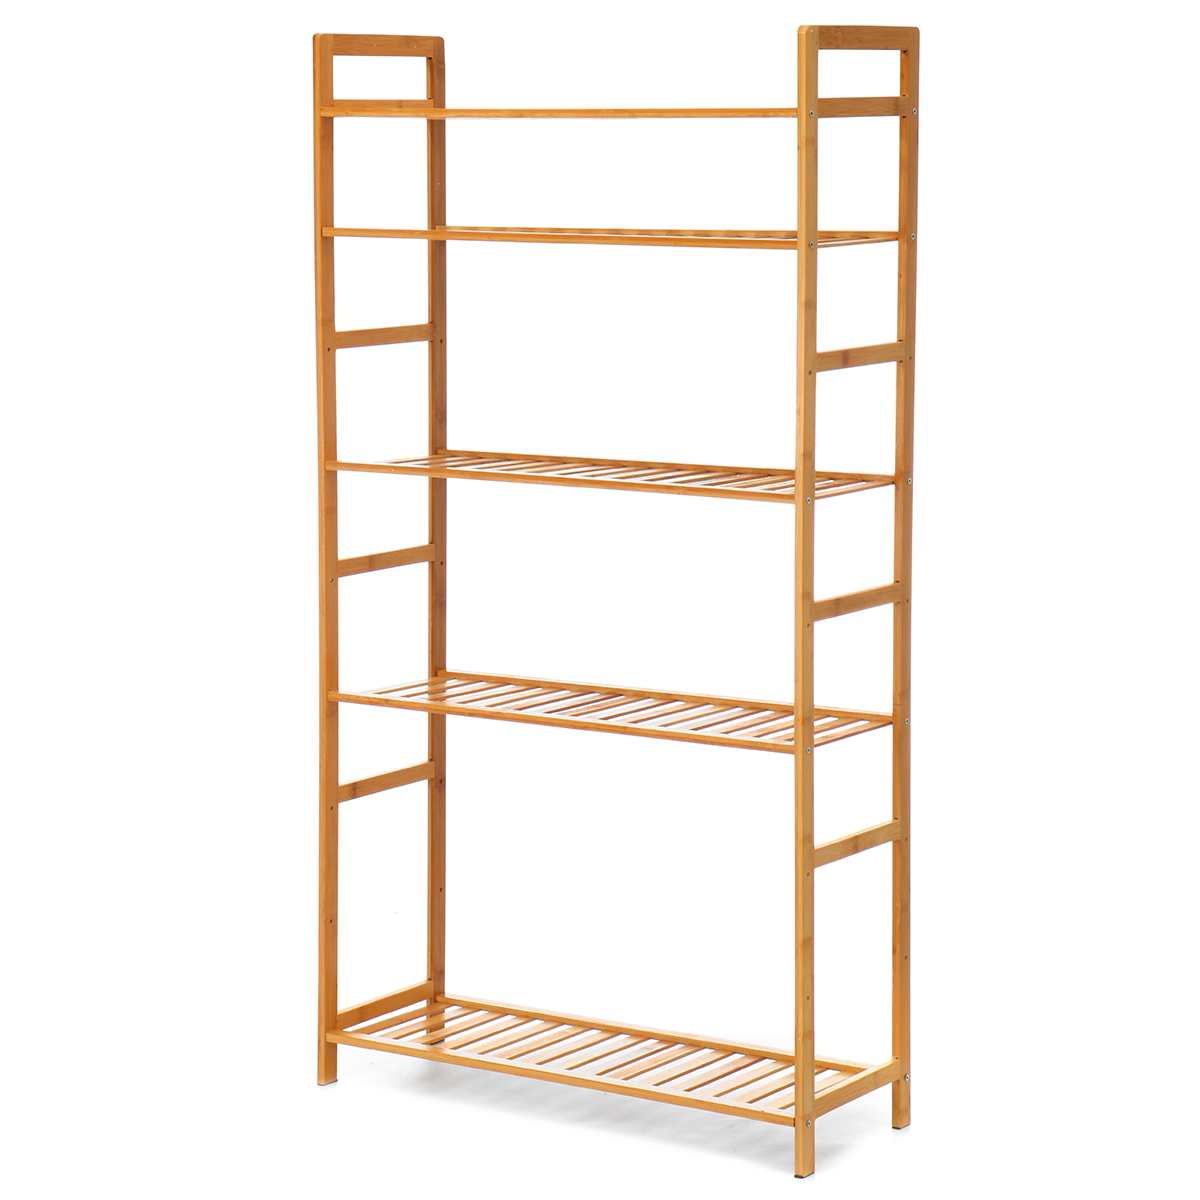 Find 1PCS Shelf Multi layer Multifunctional Floor Storage Rack Dining Room Living Room Household Finishing Assembly Mobile Wooden Shelf for Sale on Gipsybee.com with cryptocurrencies